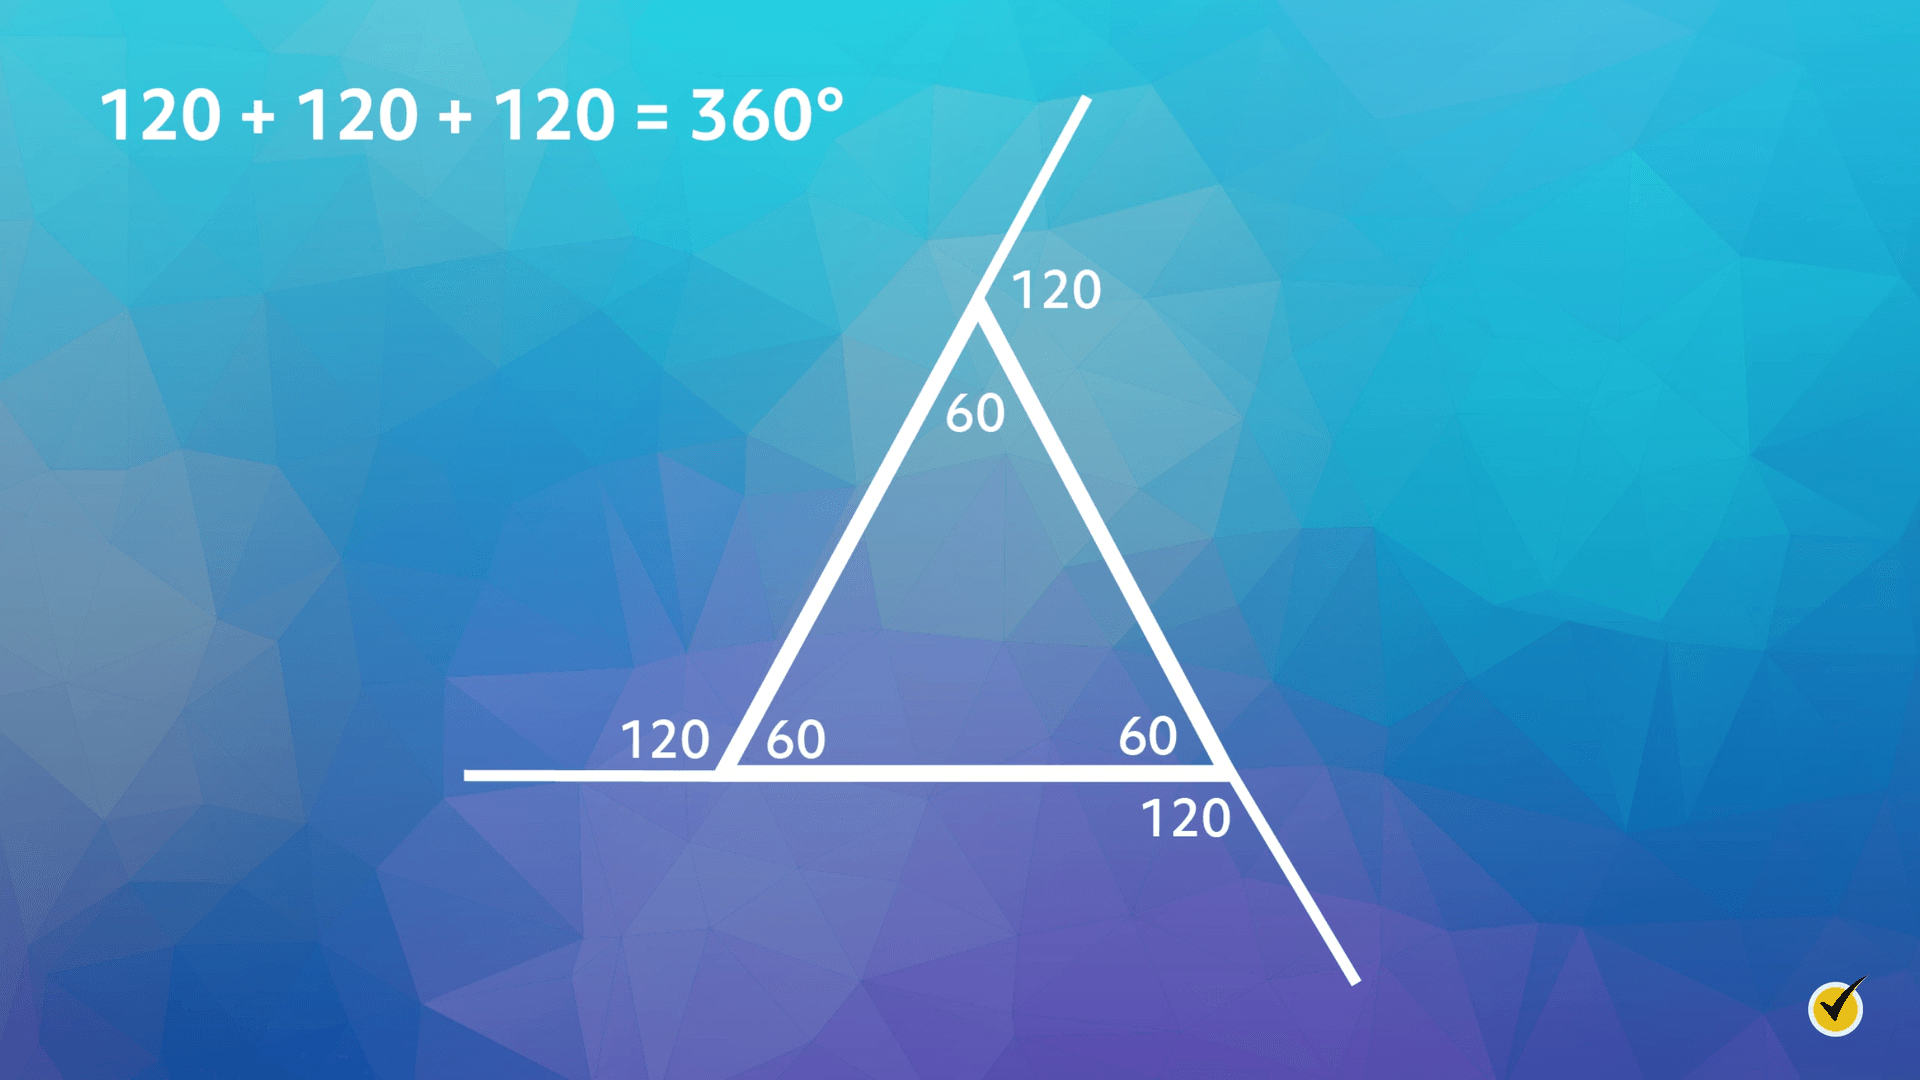 Image of a triangle with angles of 60 degrees, and exterior angles of 120 degrees.